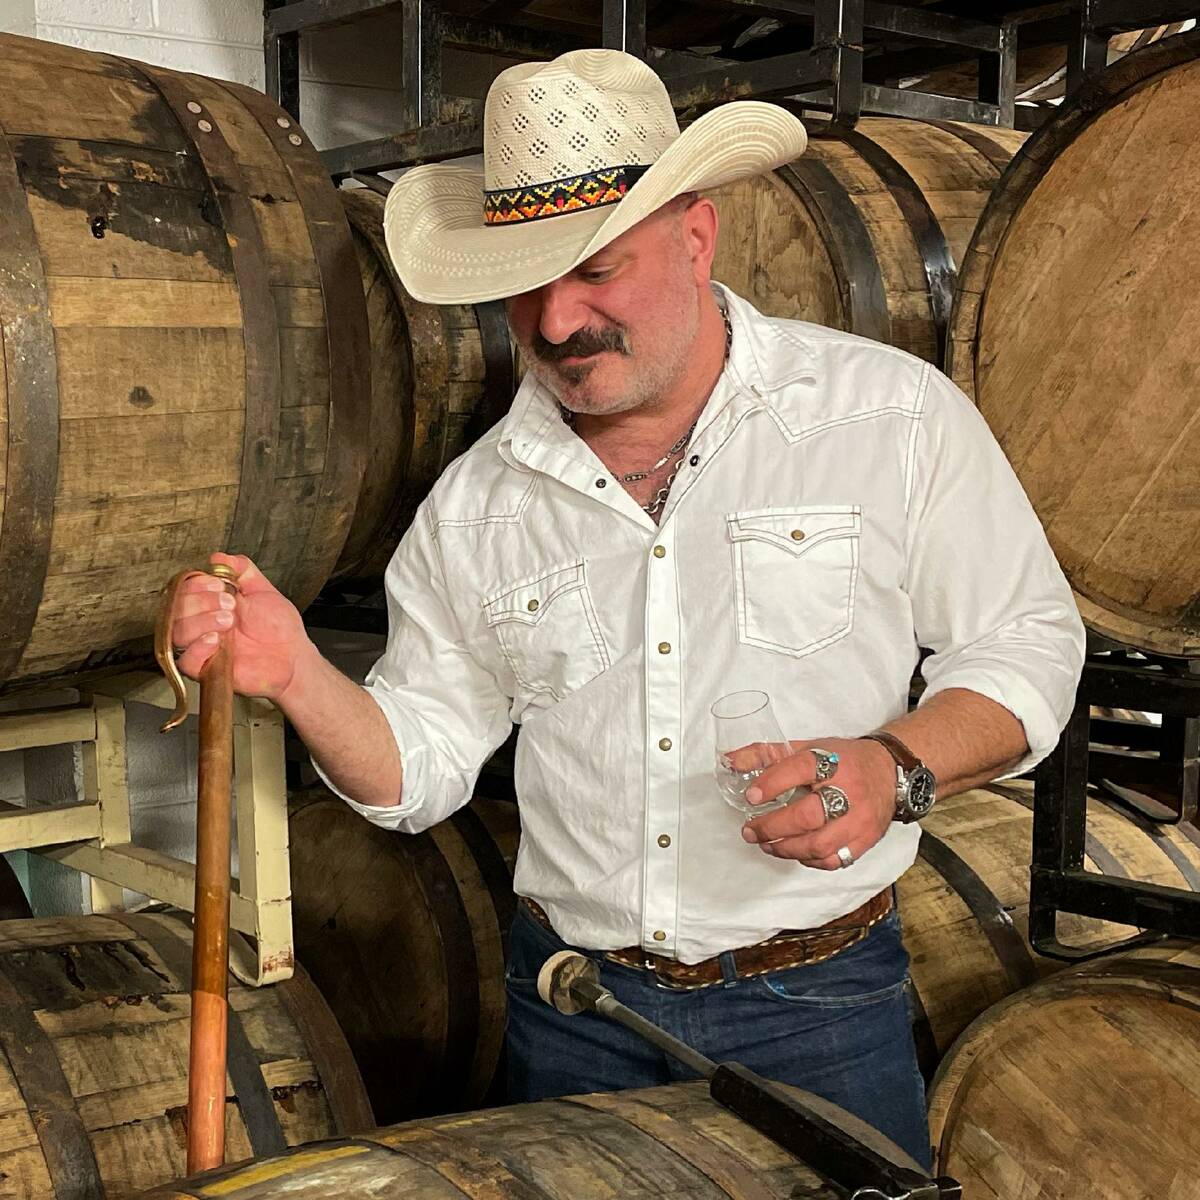 Aaron Chepenik, the co-owner of Nevada H&C Distilling Co., said there is plan to expand operati ...